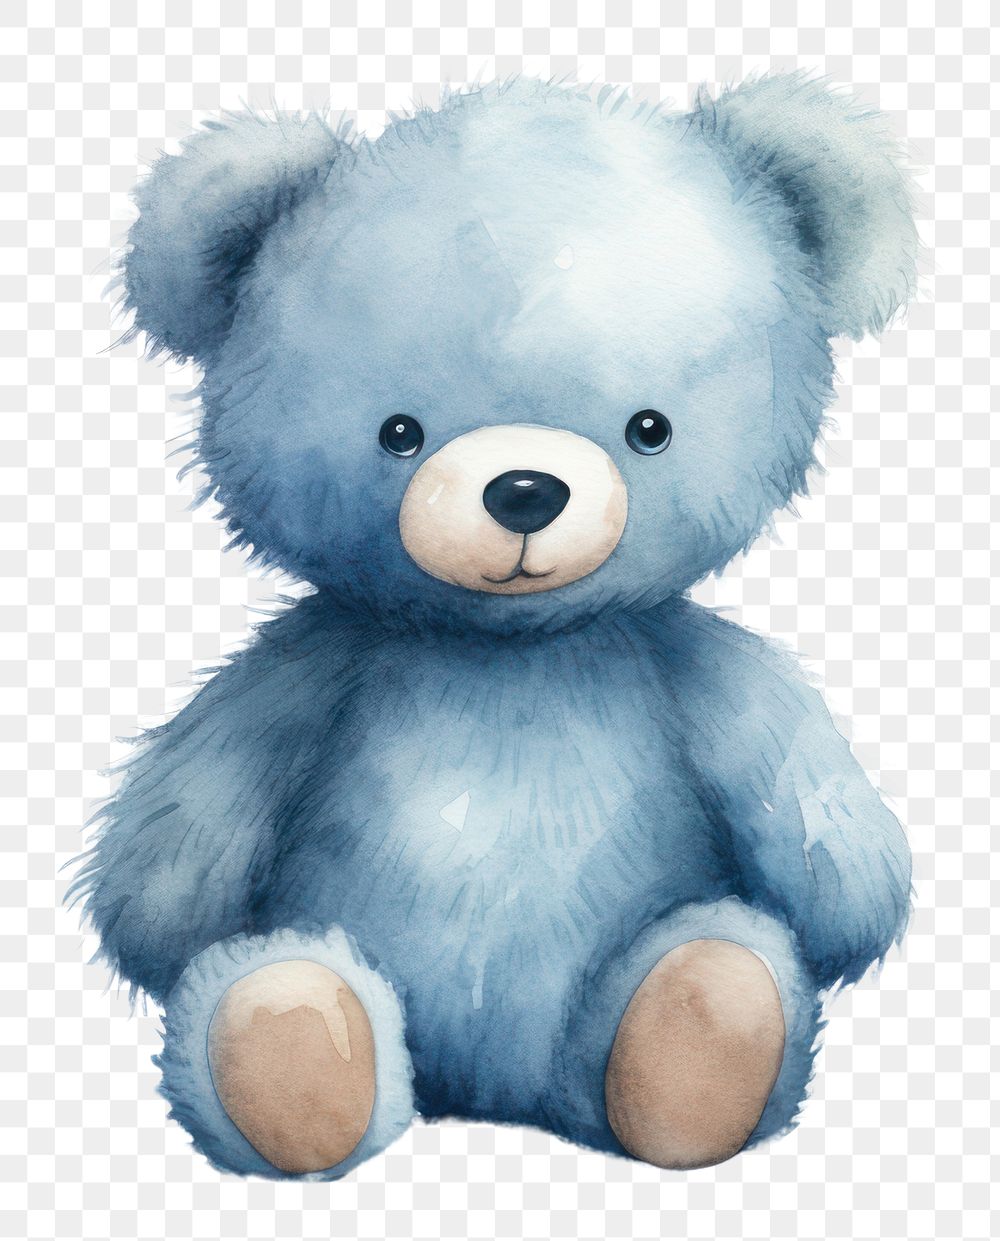 PNG Light blue teddy bear toy white background representation